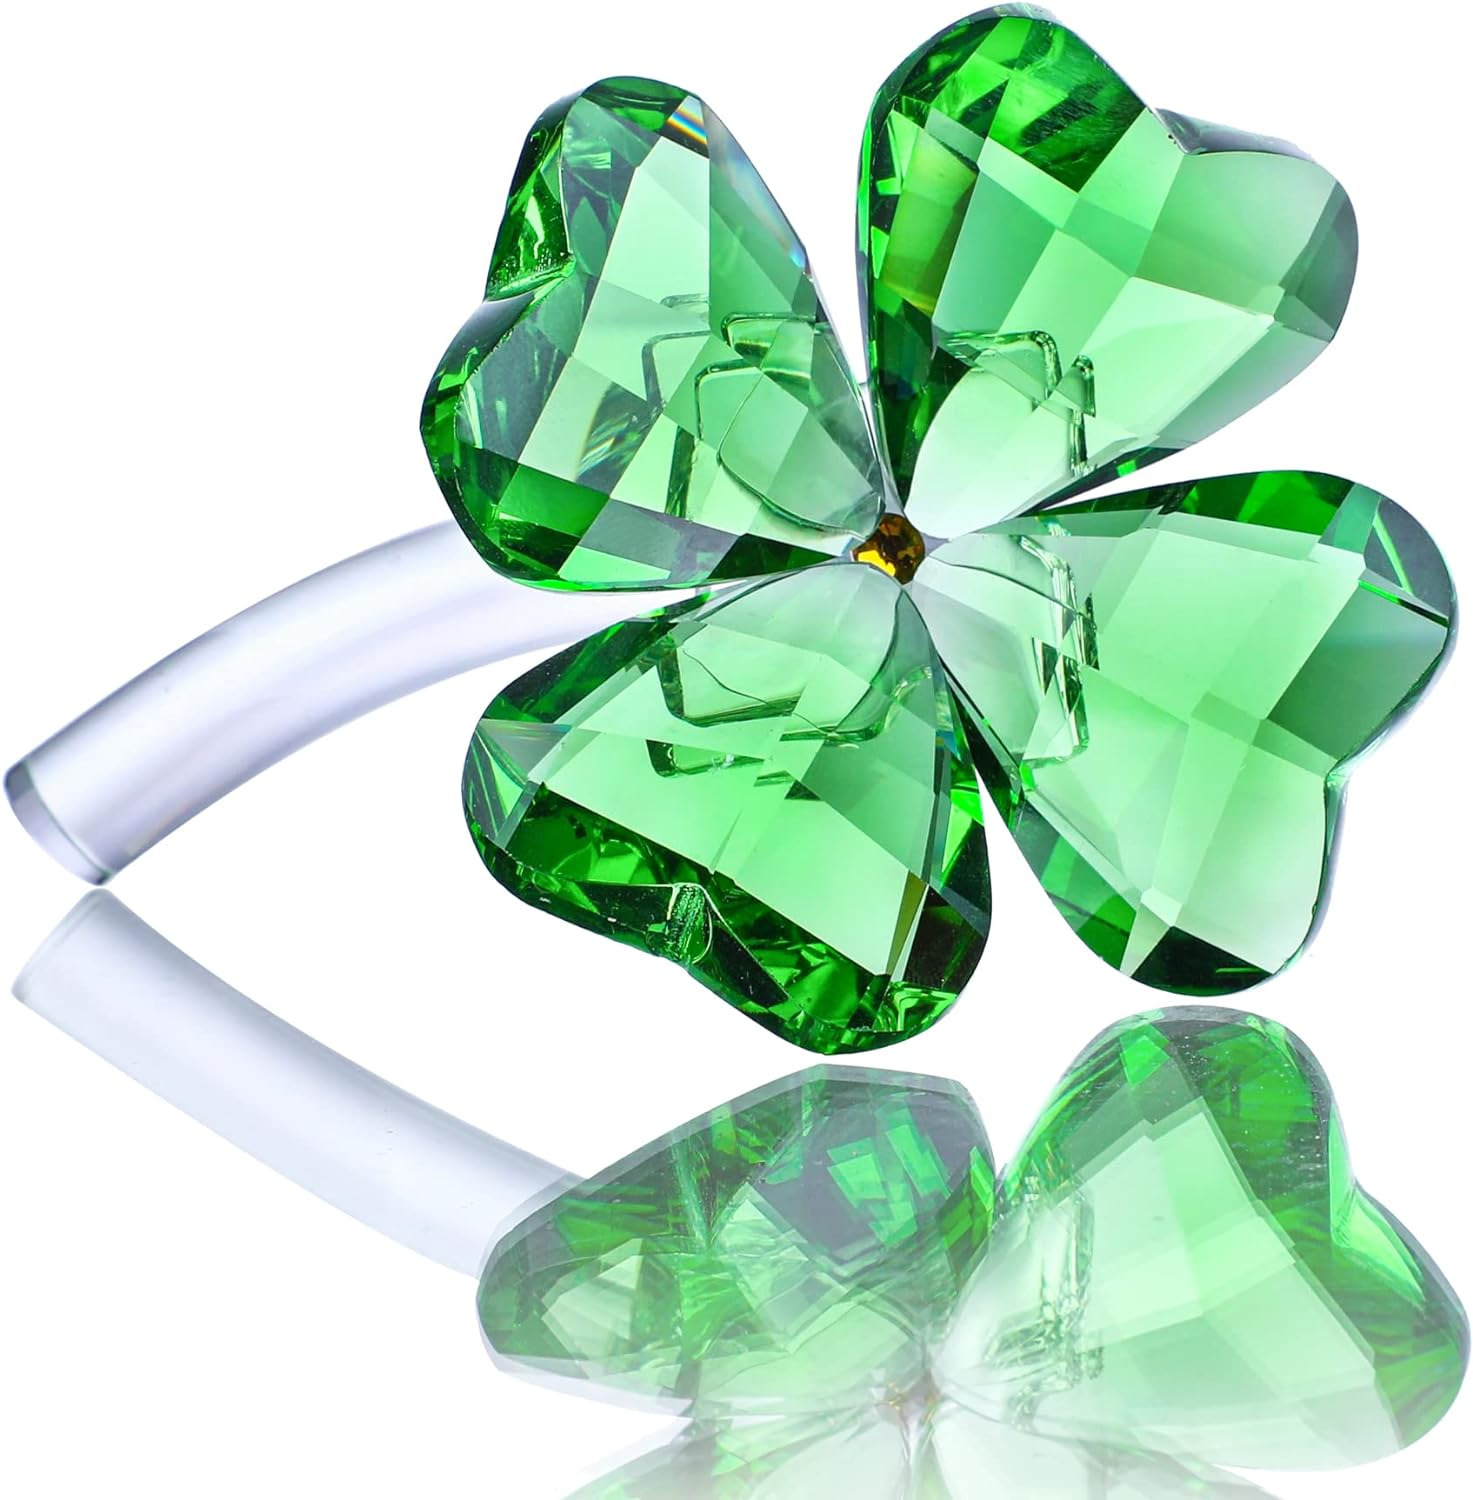 4Inch Crystal Flower Dreams Four-Leaf Clover Figurine Collectibles Green Crystal